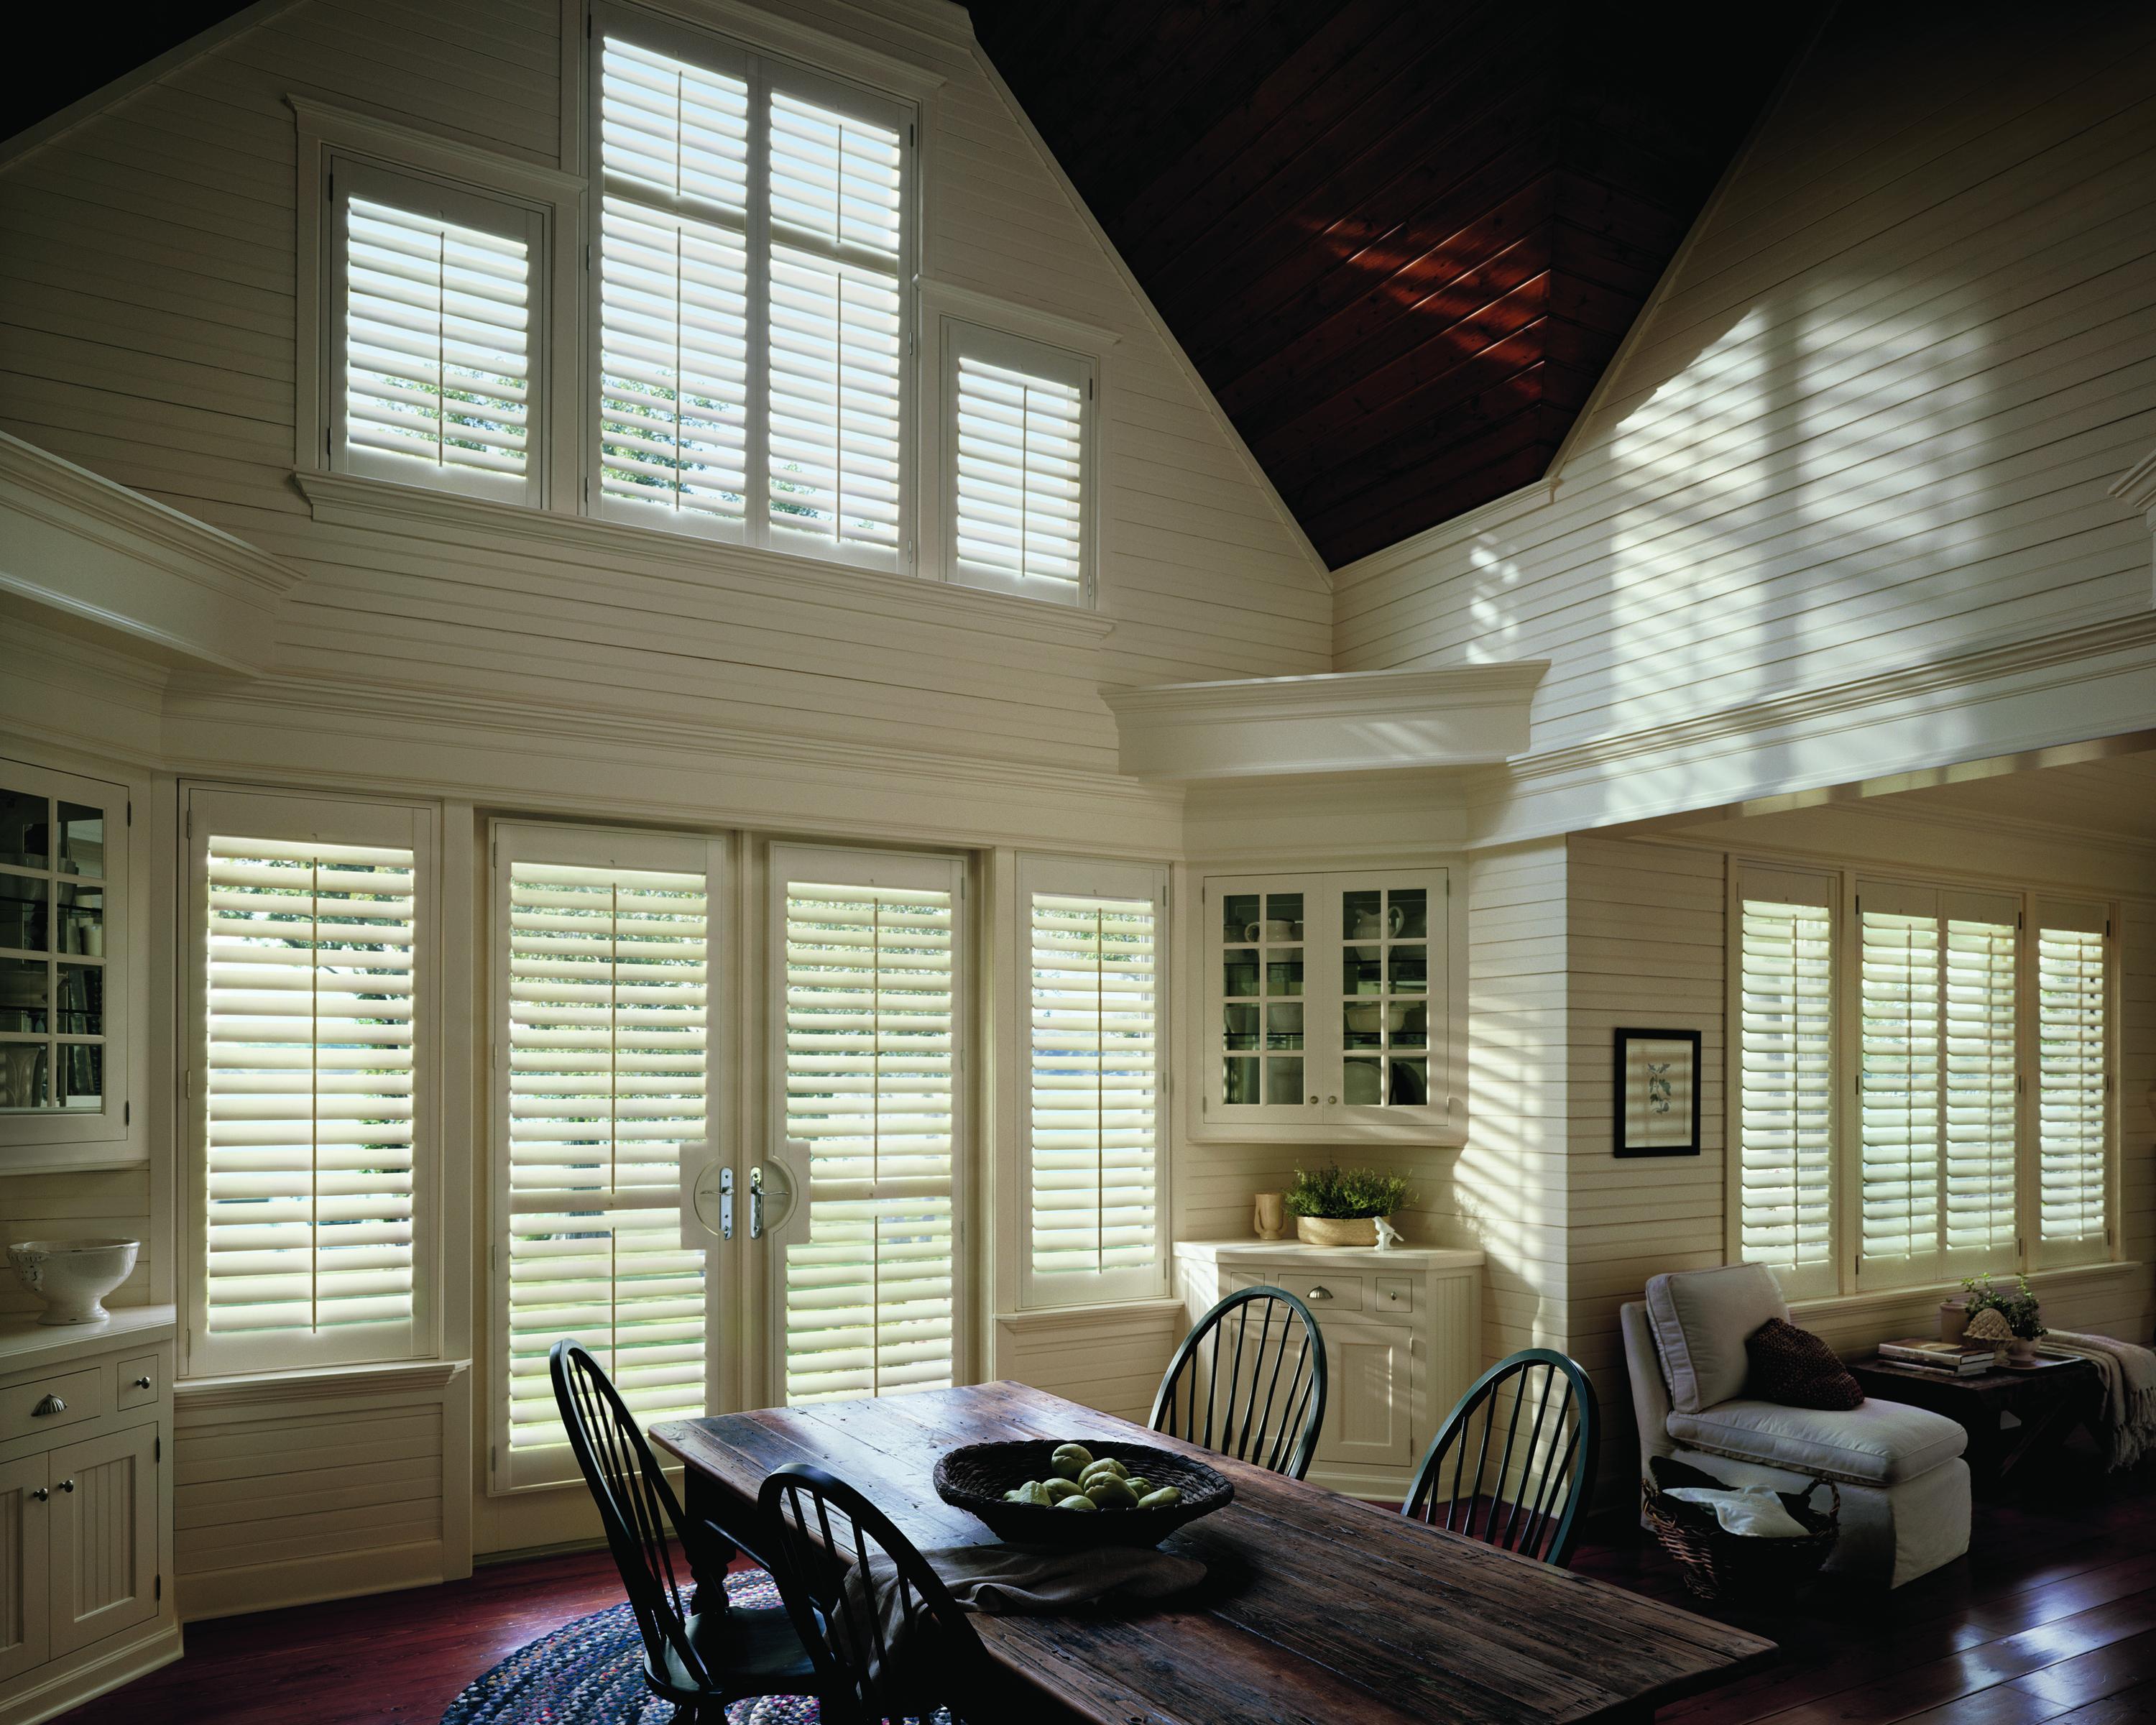 Colonial Americana style with white Hunter Douglas shutters